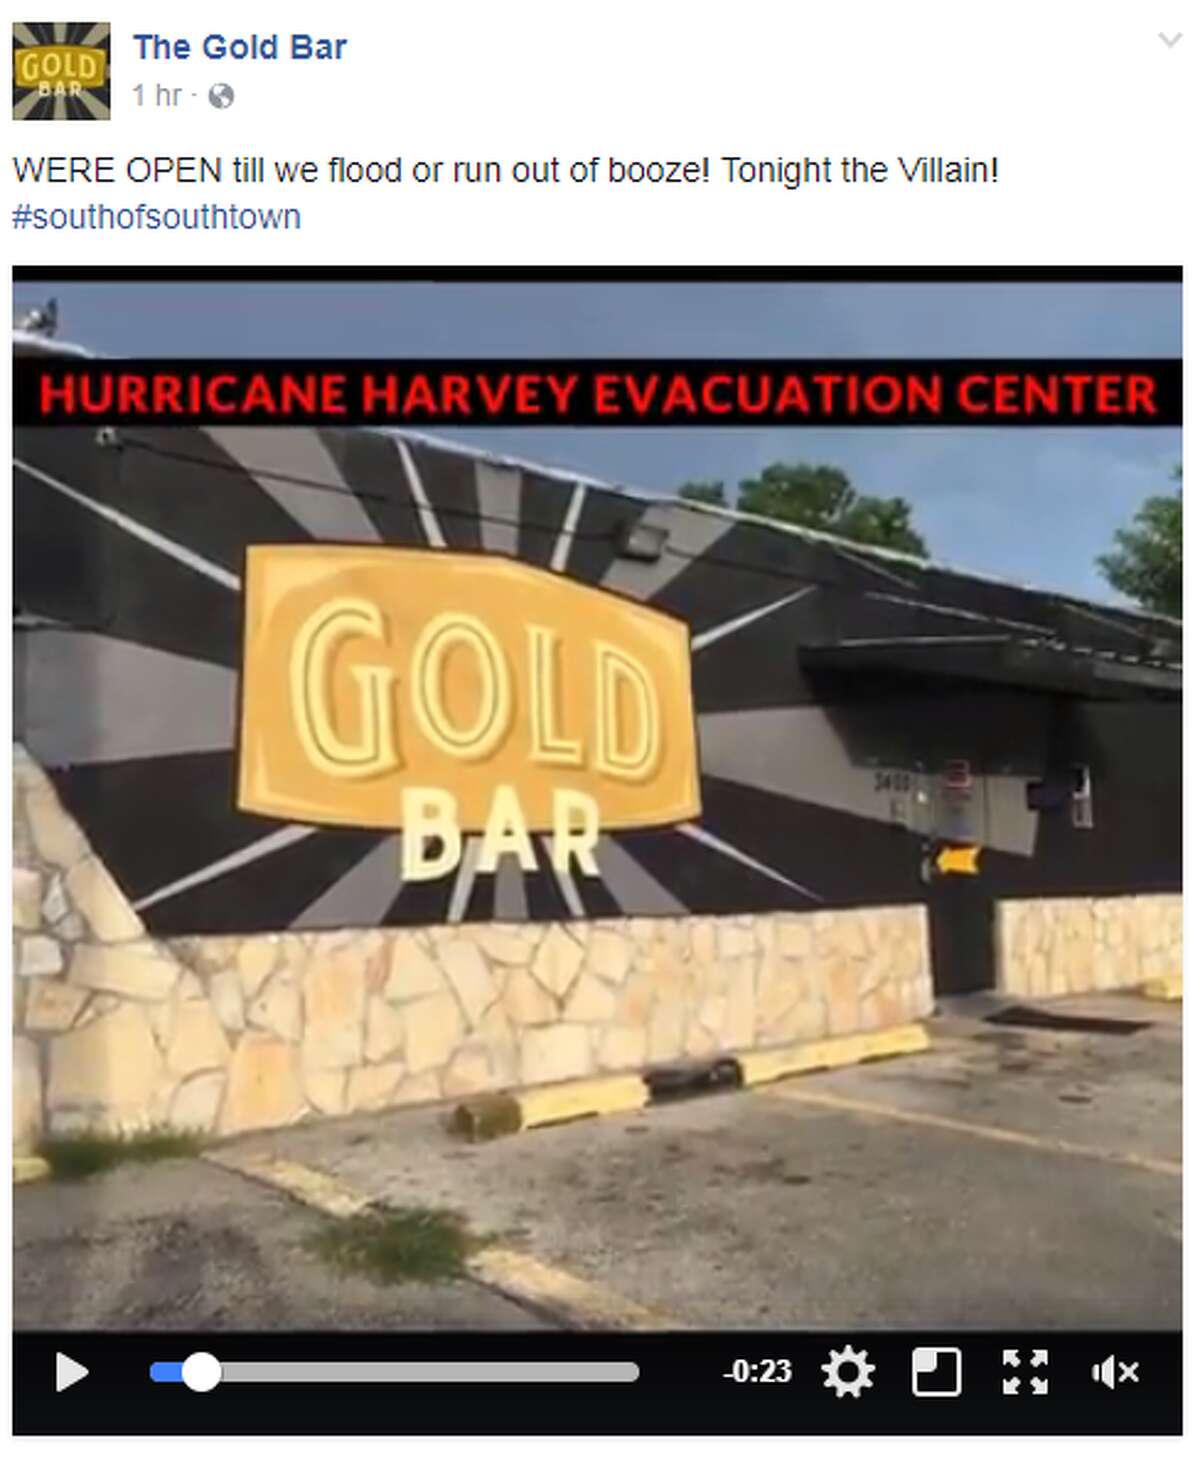 The Gold Bar is open until they "flood or run out of booze."